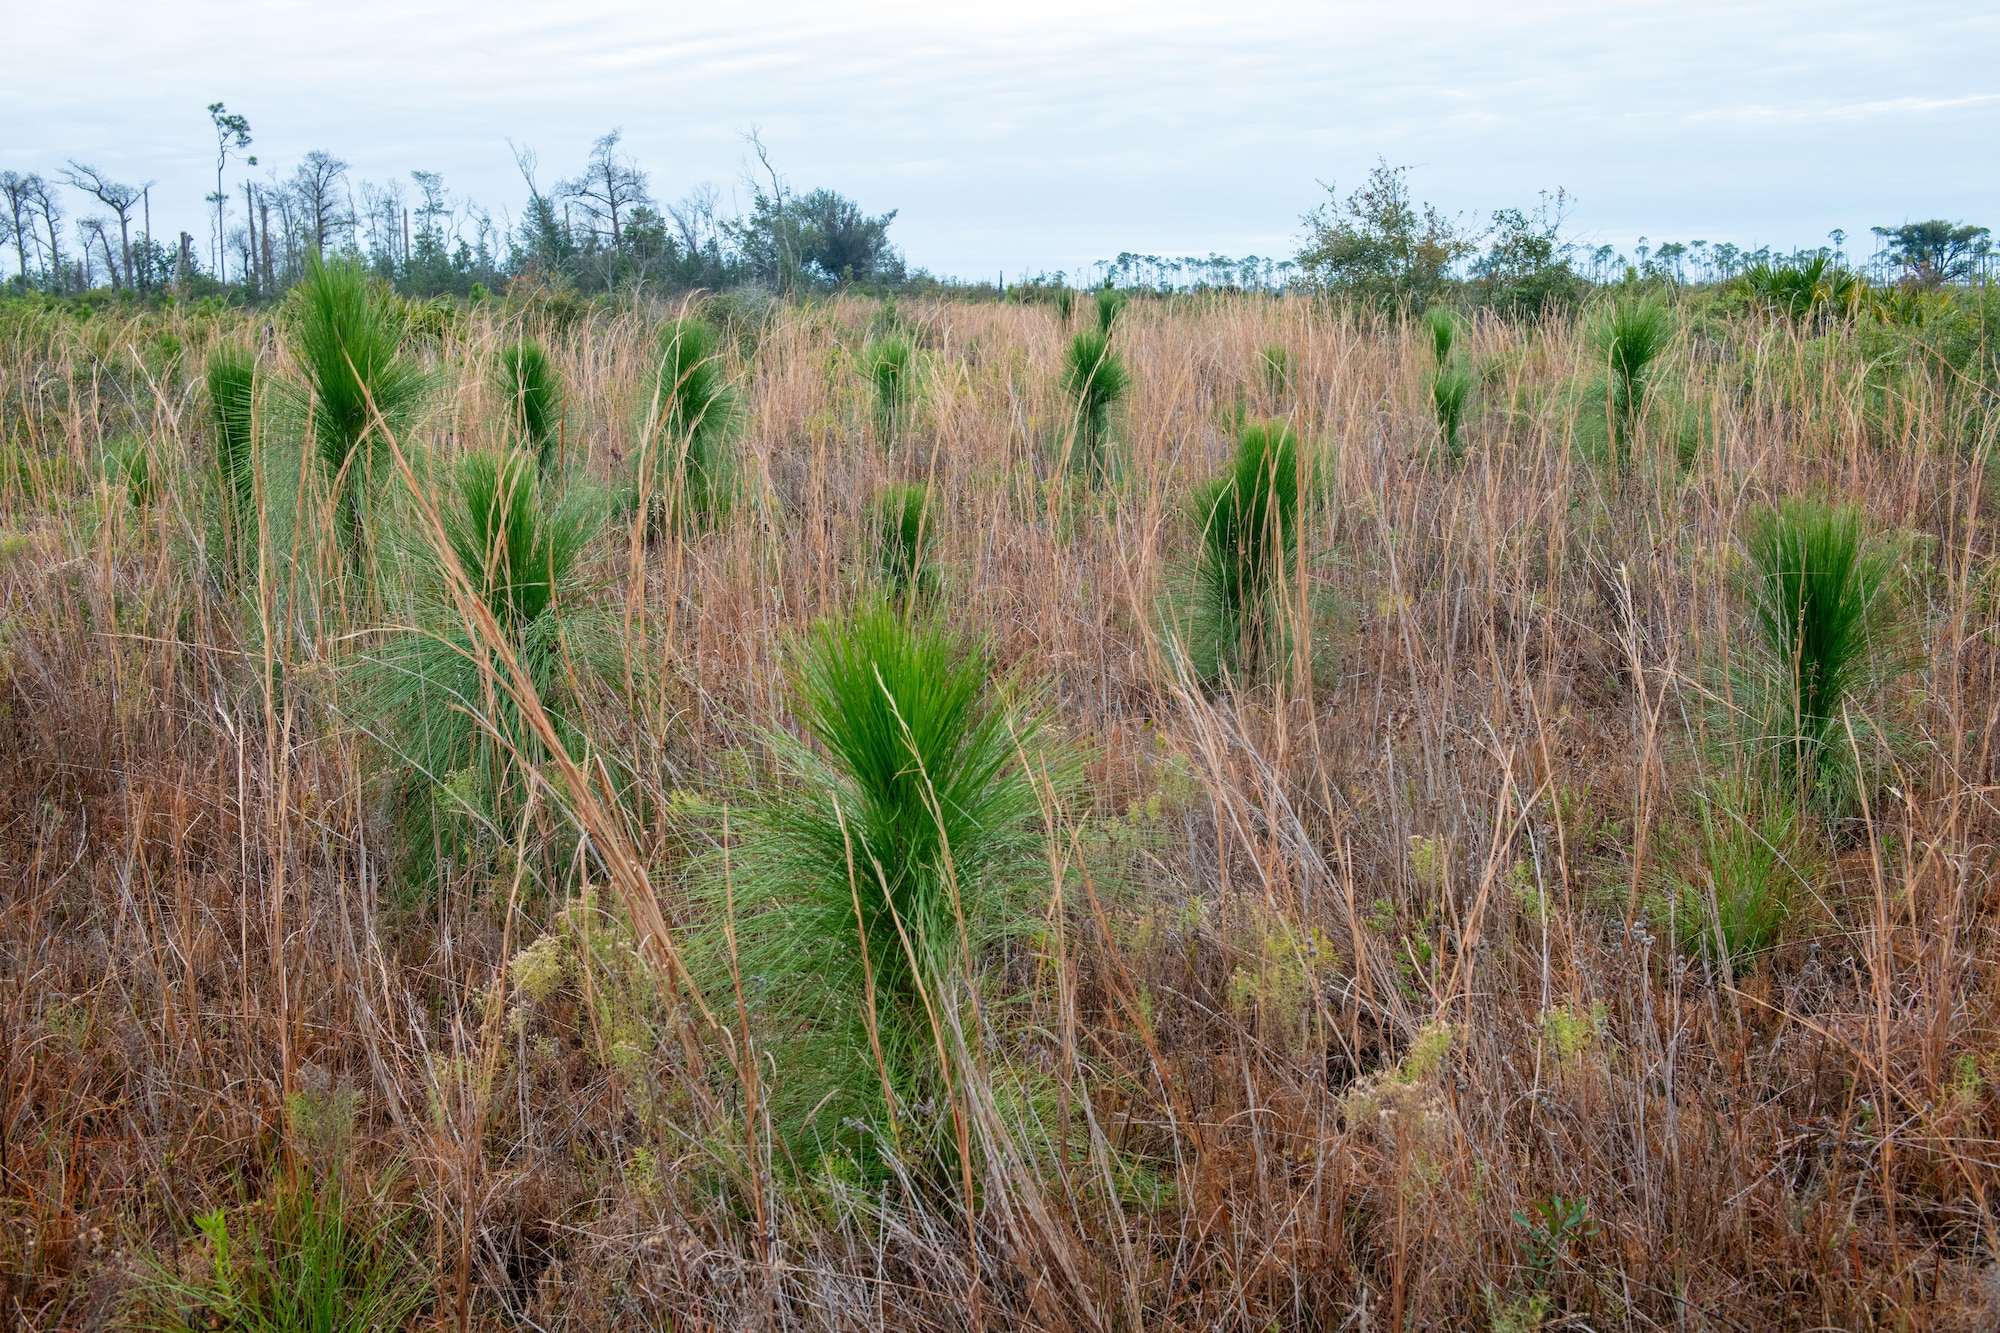 Longleaf pine trees grow in rows amongst native groundcover